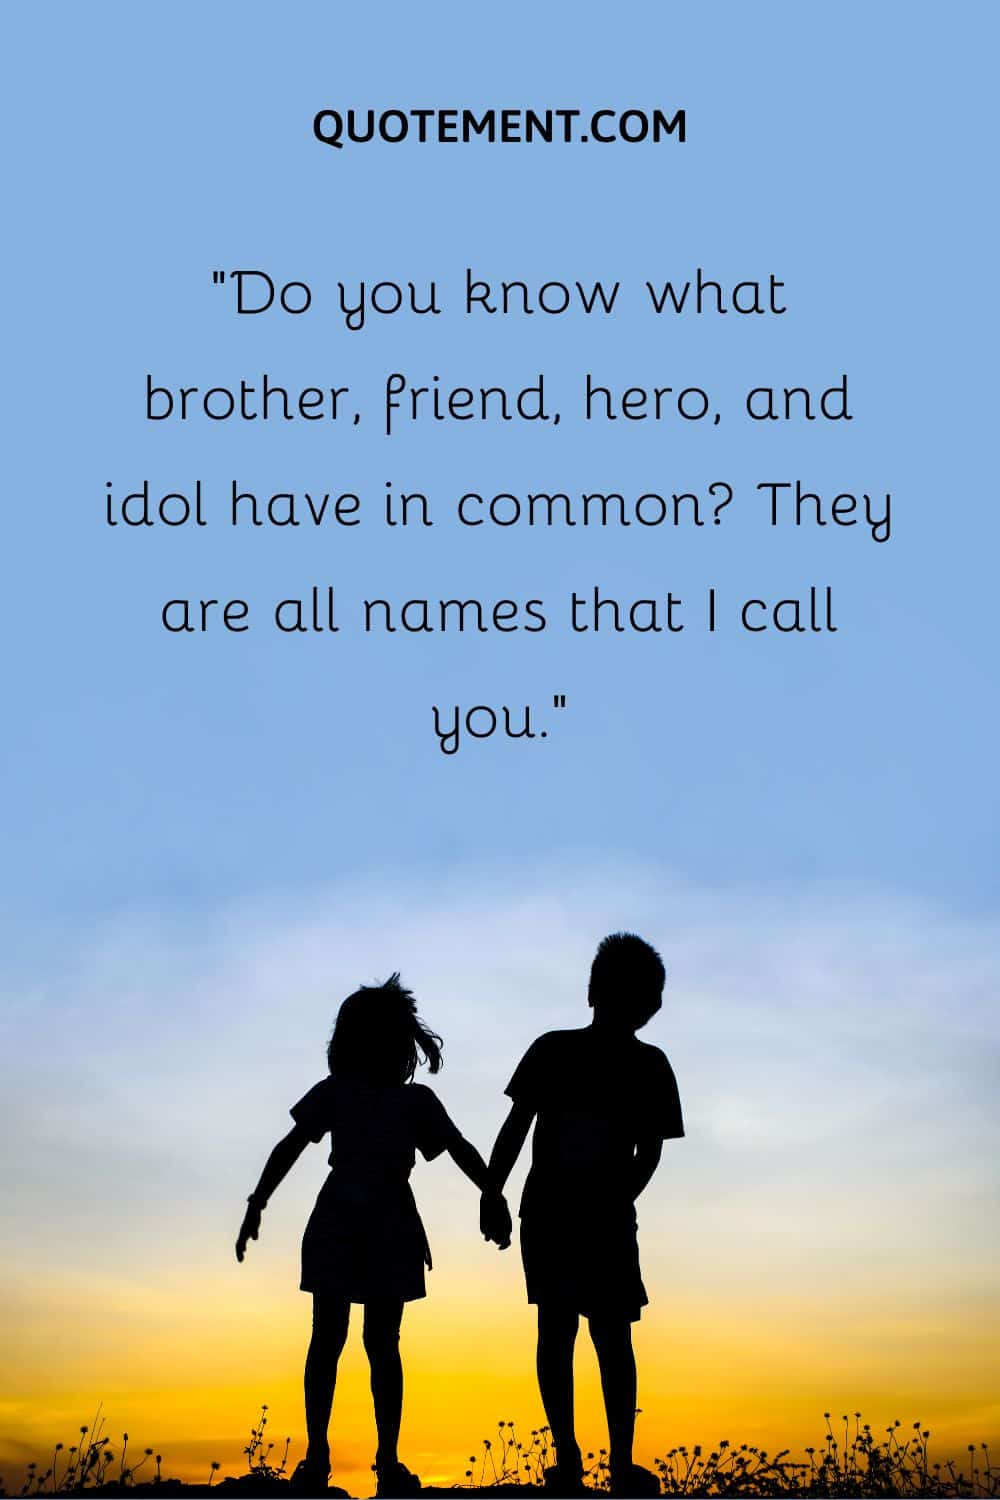 “Do you know what brother, friend, hero, and idol have in common They are all names that I call you.”